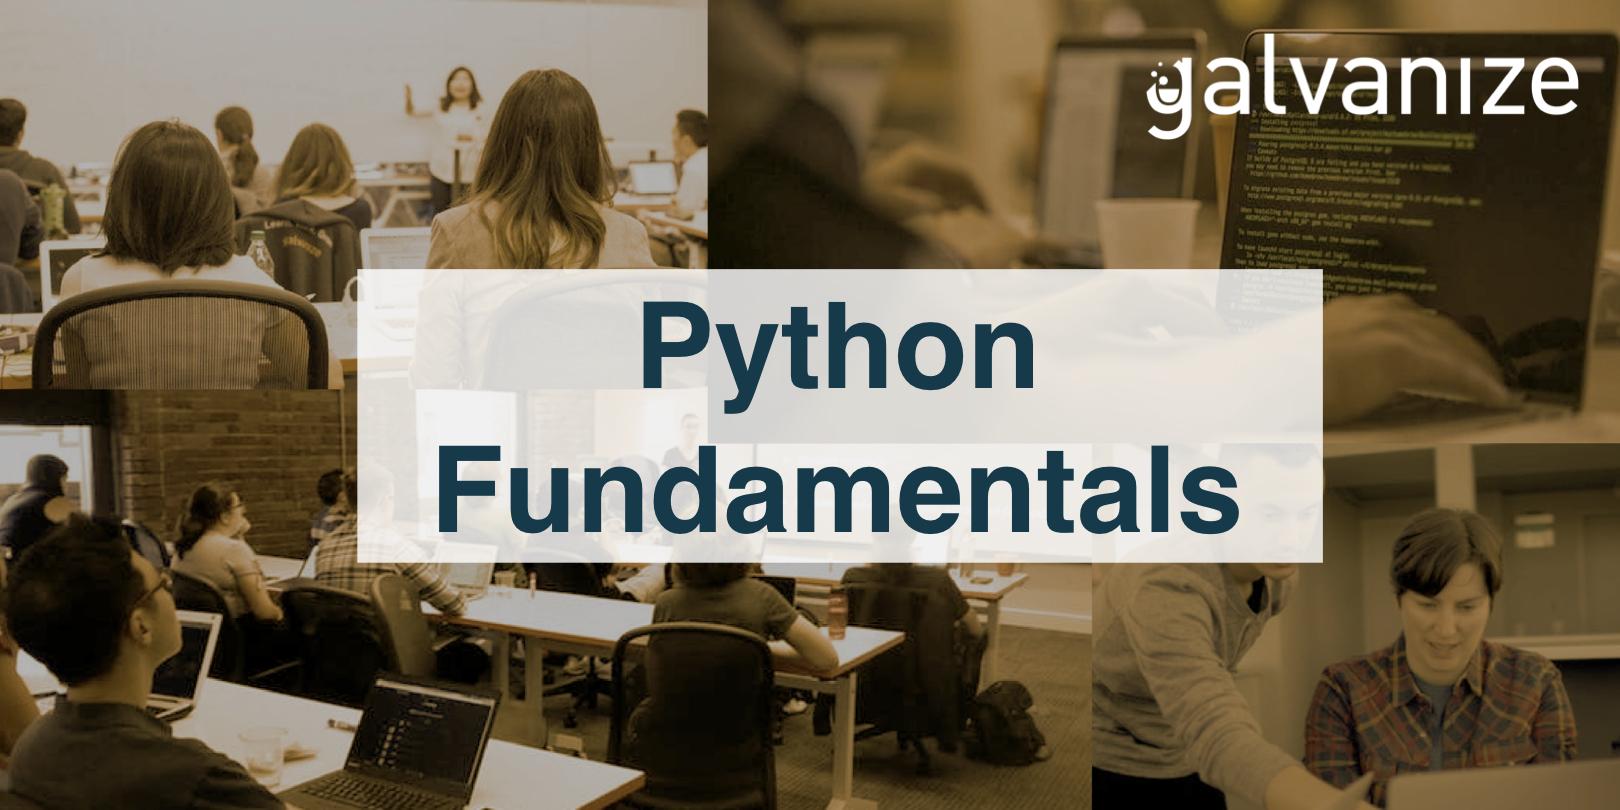 Live Online Python Fundamentals: Accelerated (6/29/20 - 7/16/20)